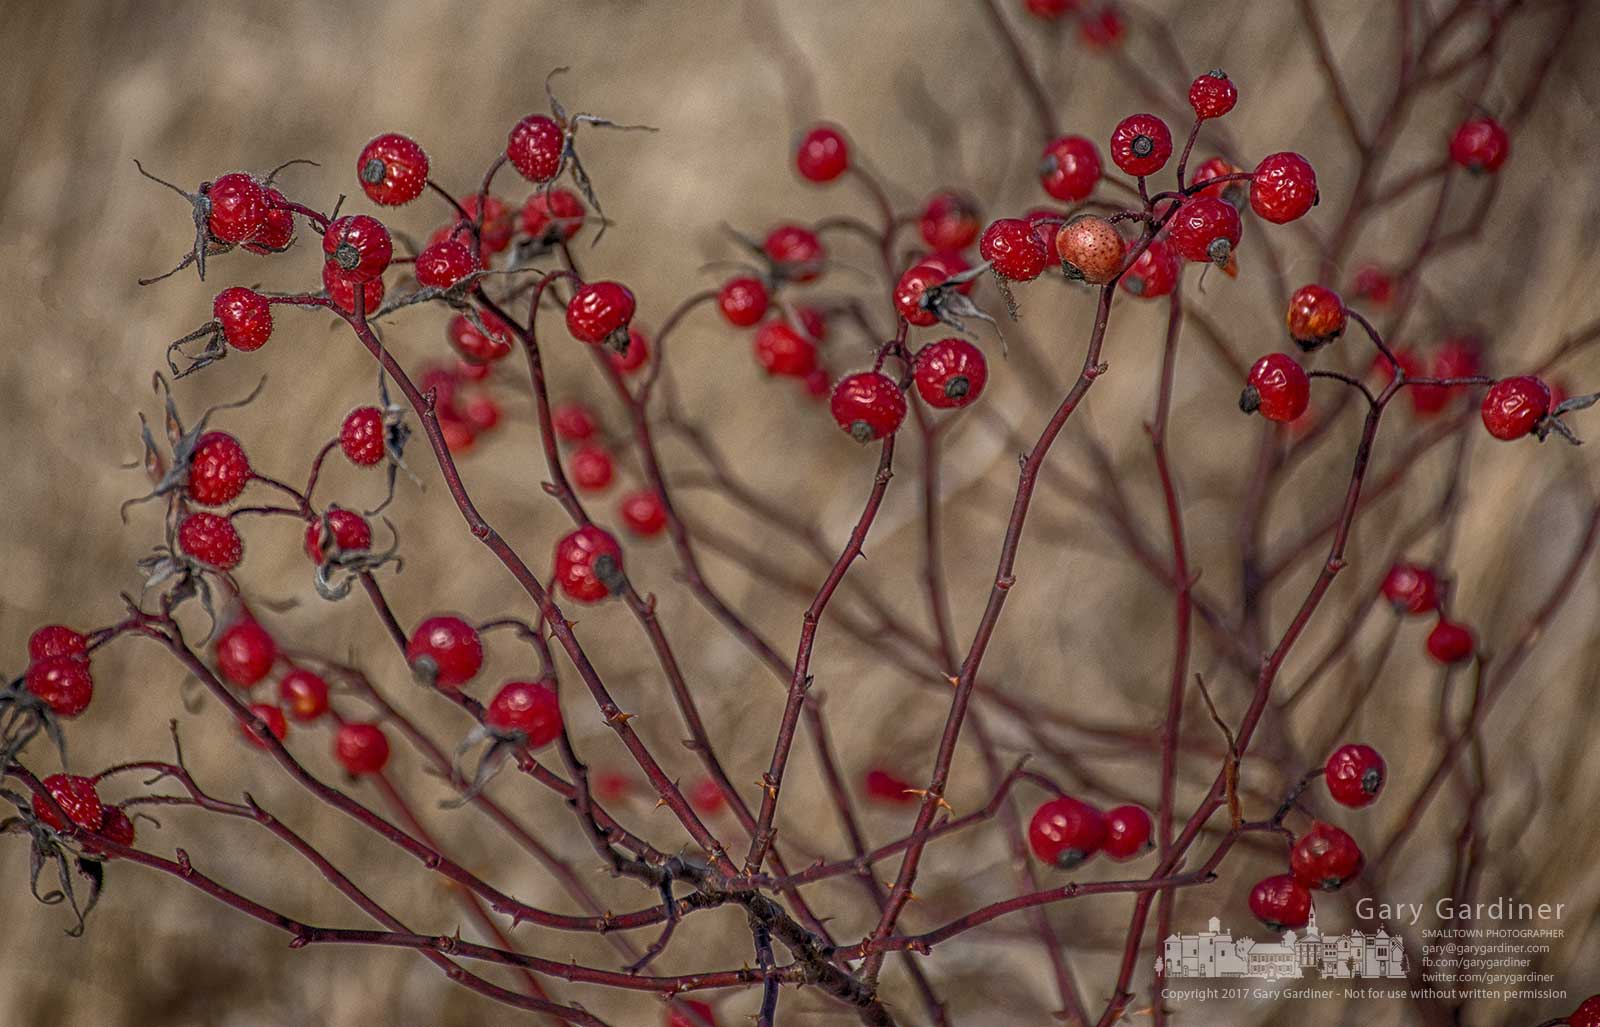 Rose hips growing along the shoreline at Highlands Wetlands add a vibrant color to the more drab colors of winter. My Final Photo for Dec. 27, 2017.